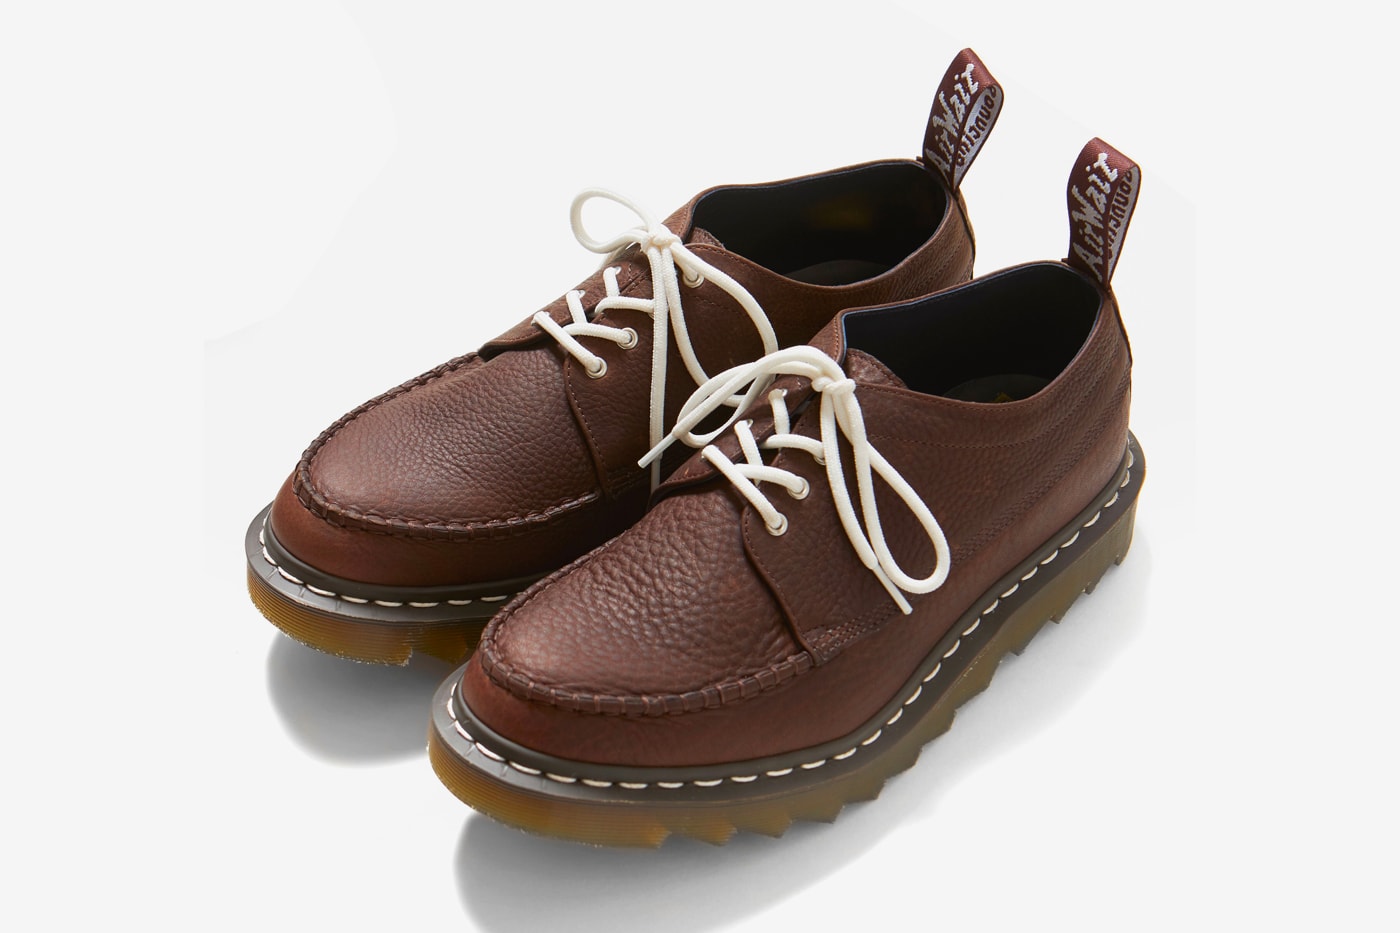 nanamica Dr Martens Camberwell MIE Black Brown nautical marine Japanese tokyo shoes footwear piece fine grain leather air cushioning ziggy sole grip traction tread stitching timeless classic vamp quarter